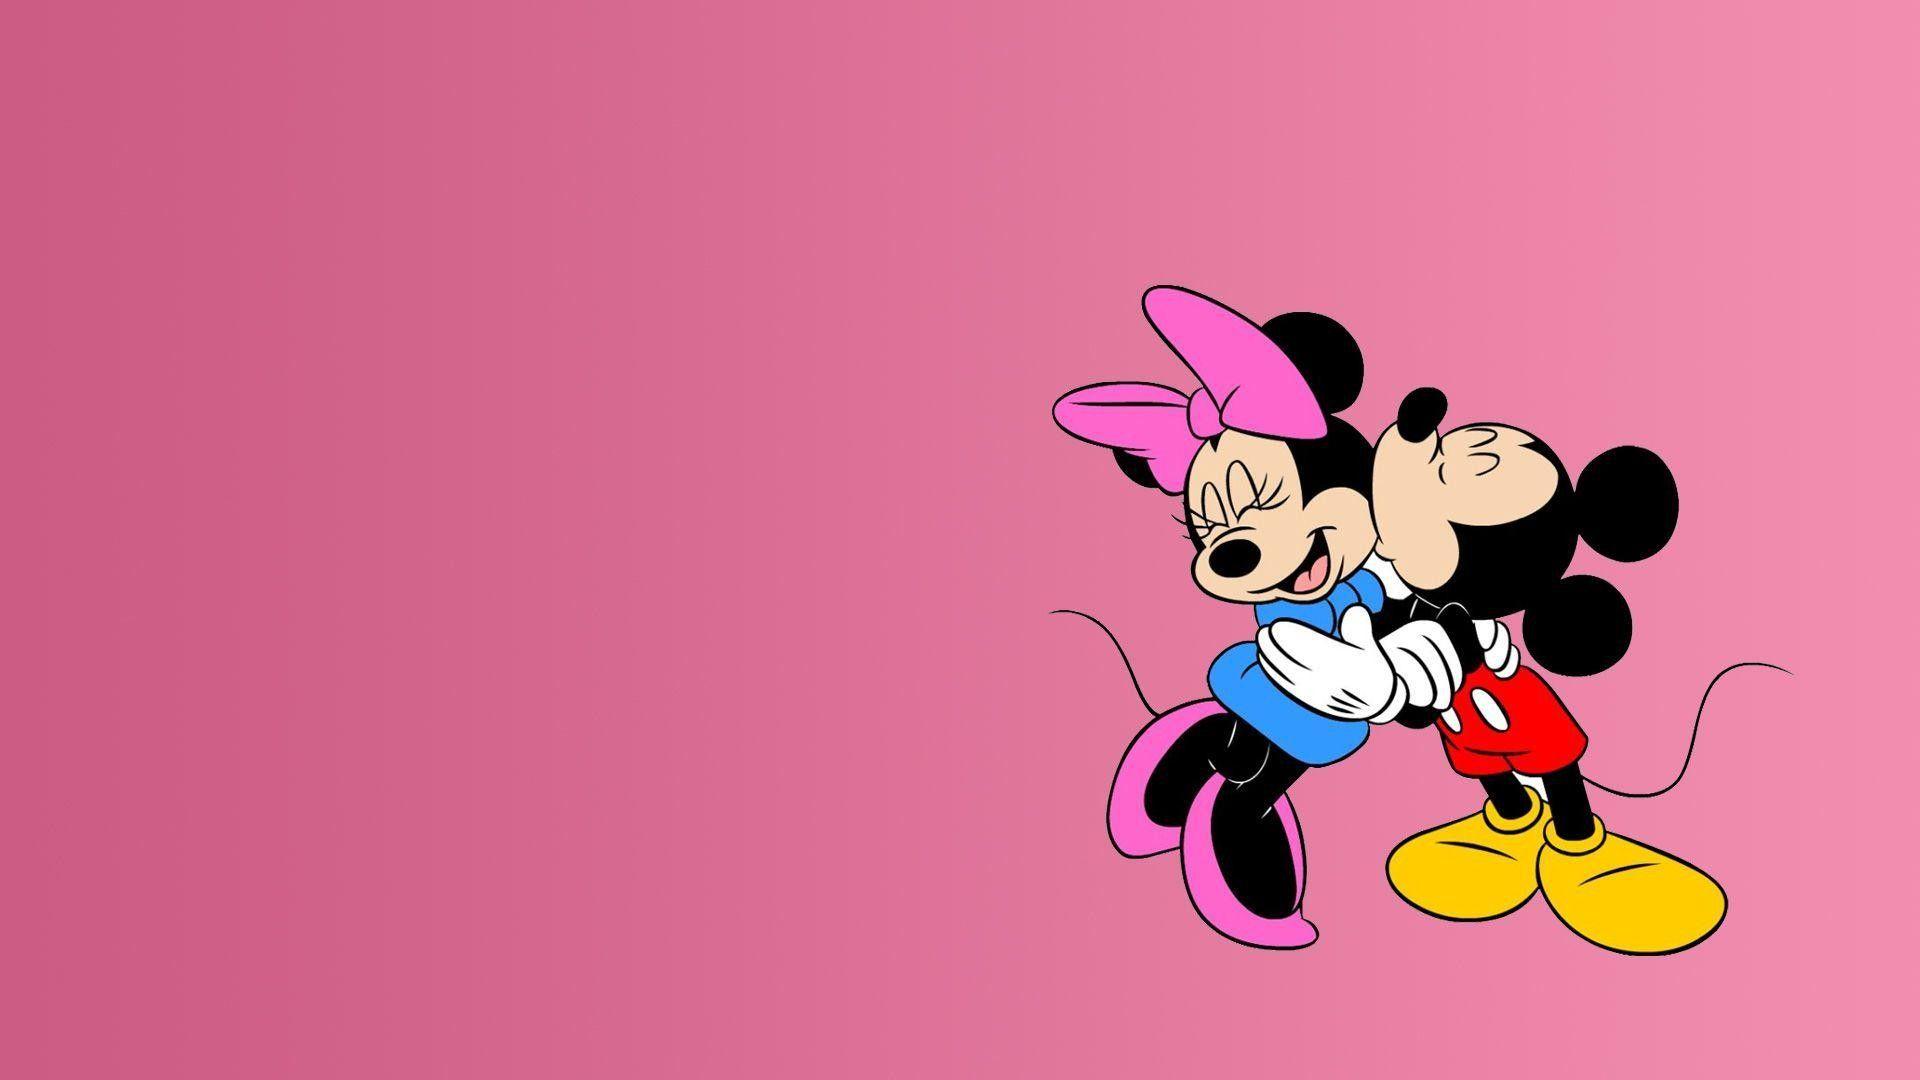 100+] White Mickey Mouse Wallpapers | Wallpapers.com